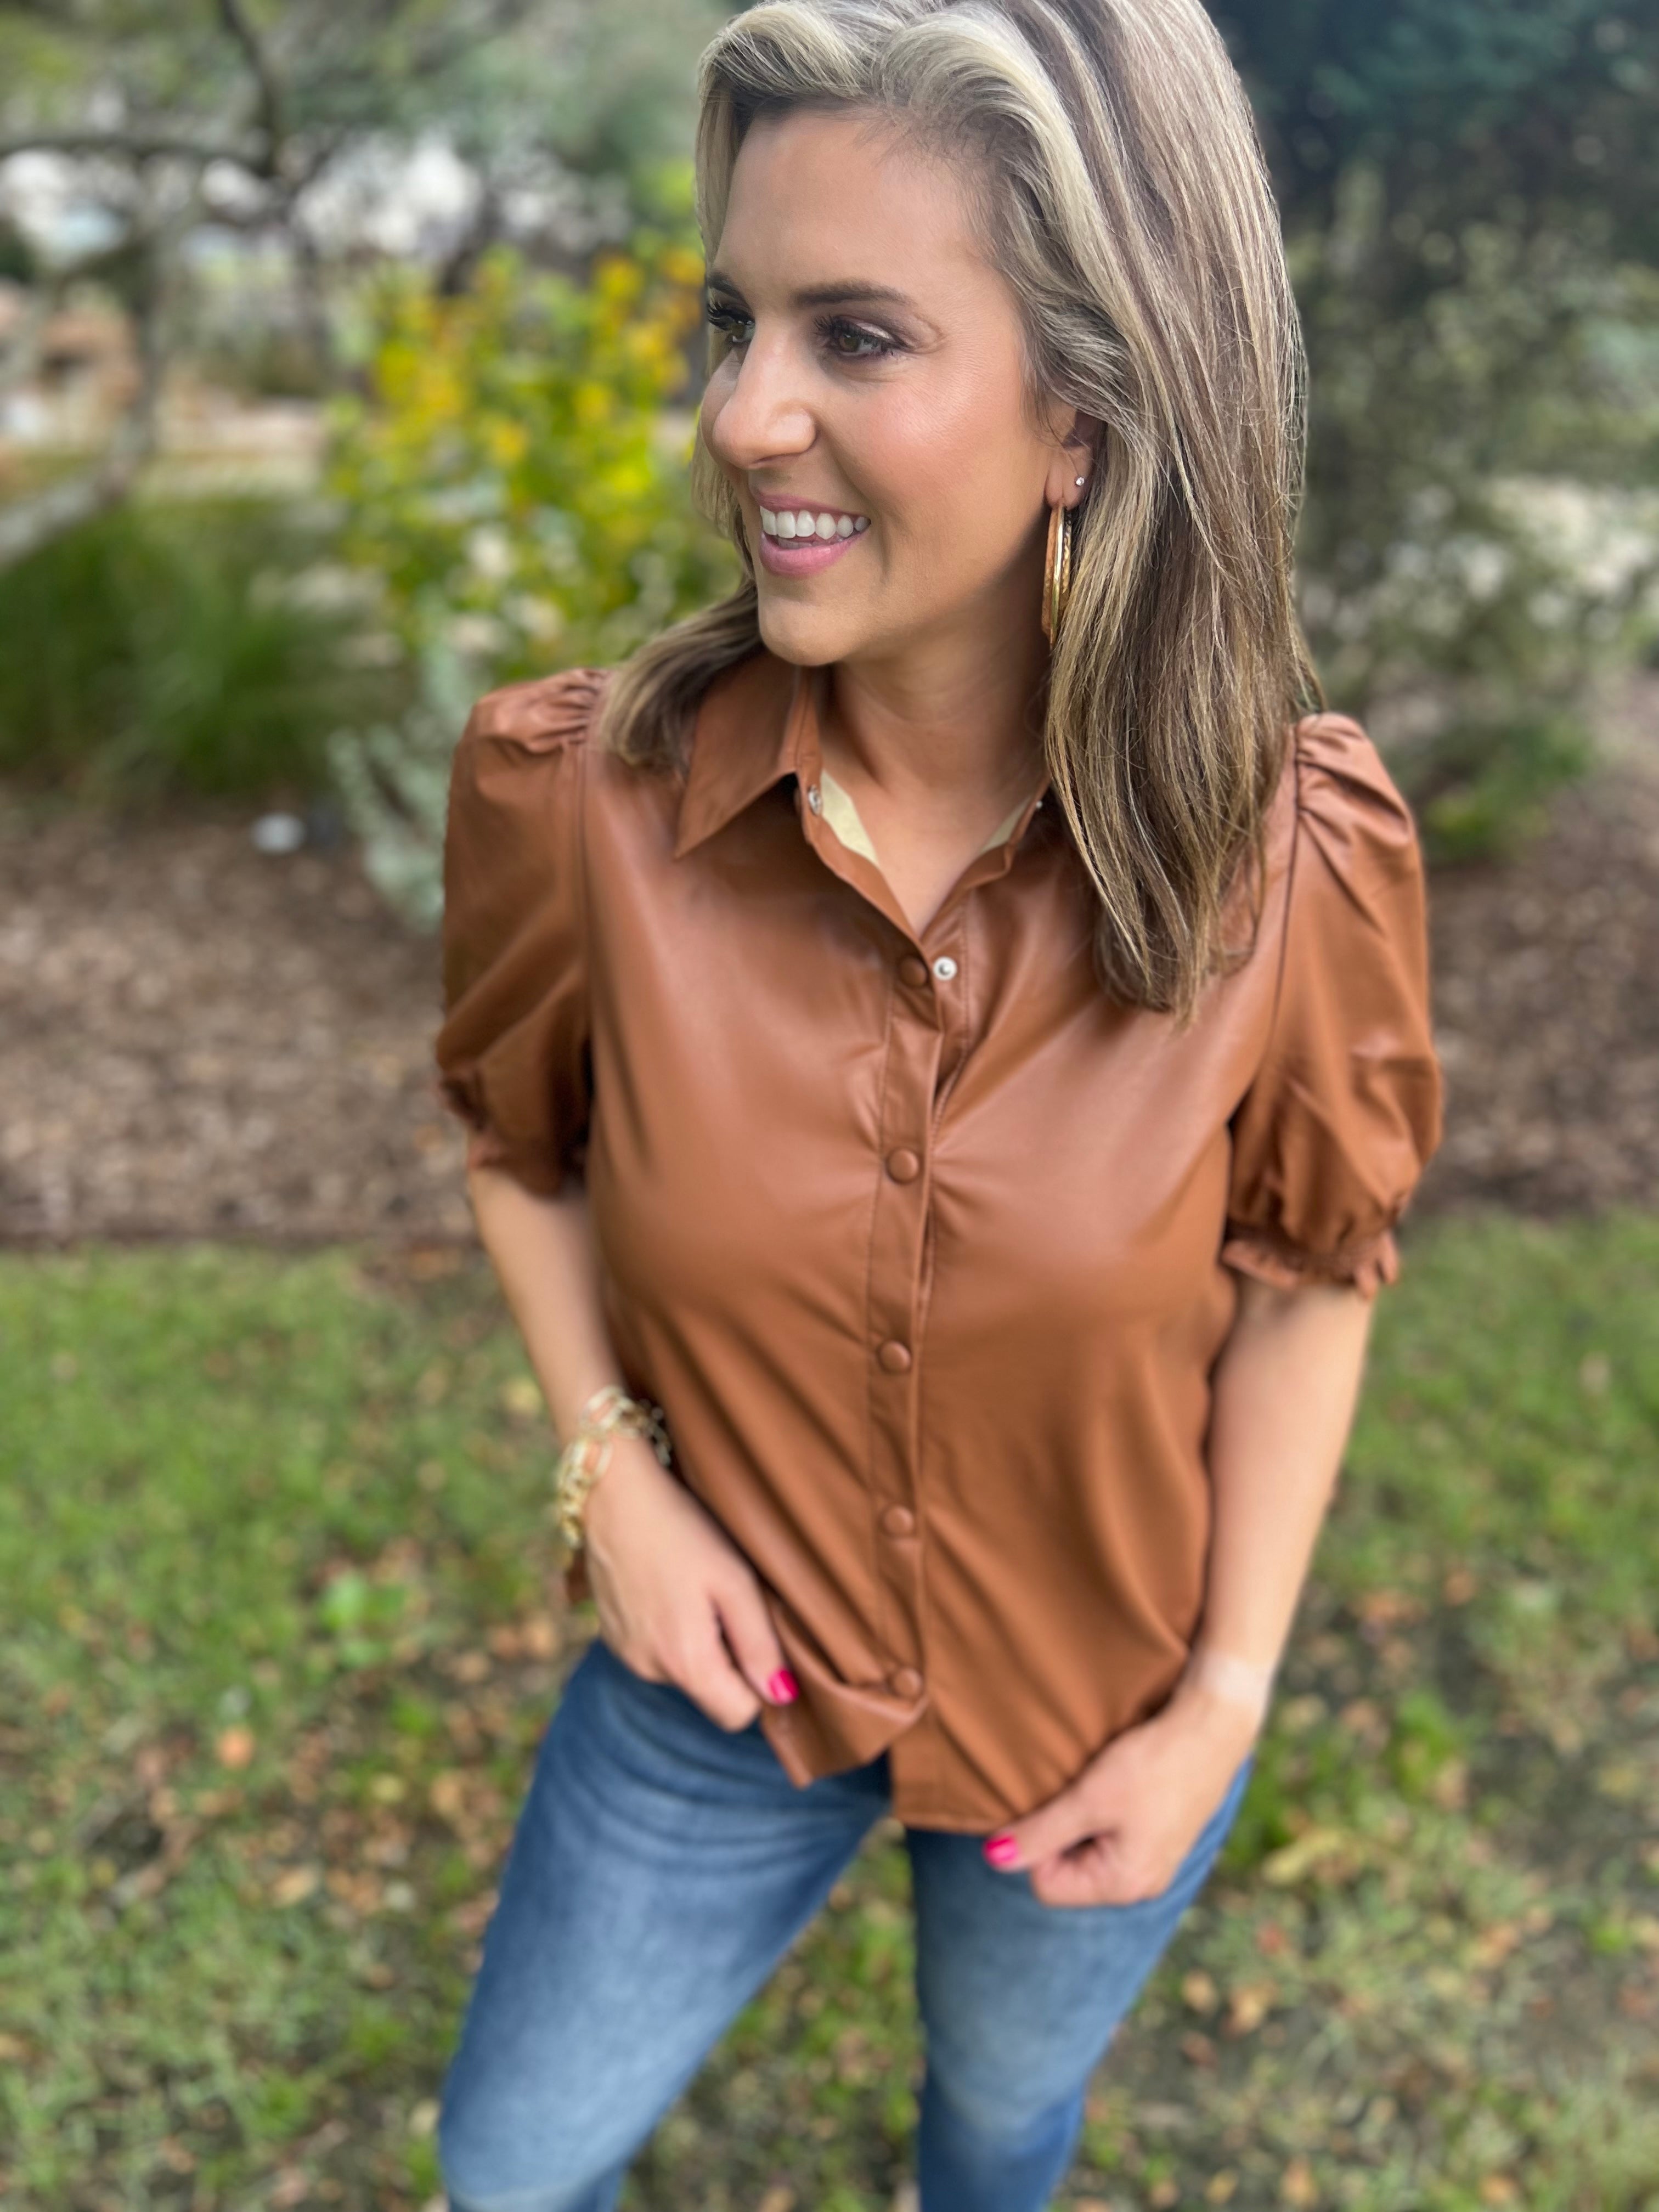 Brown Faux Leather Button Top